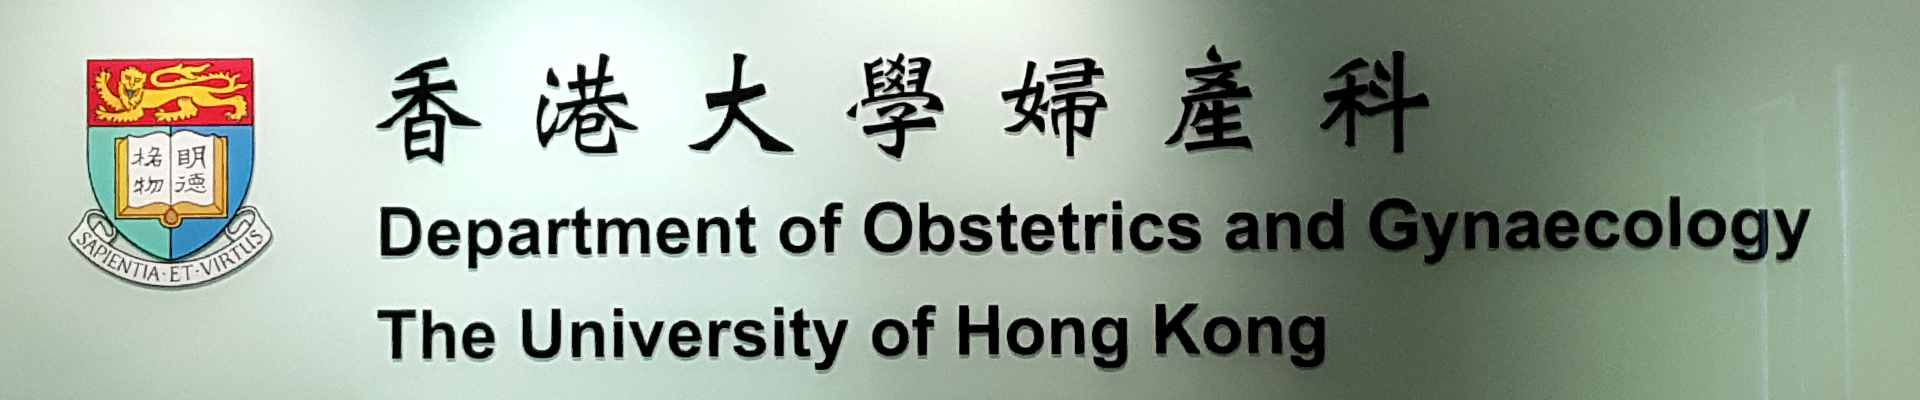 Department of Obstetrics and Gynaecology